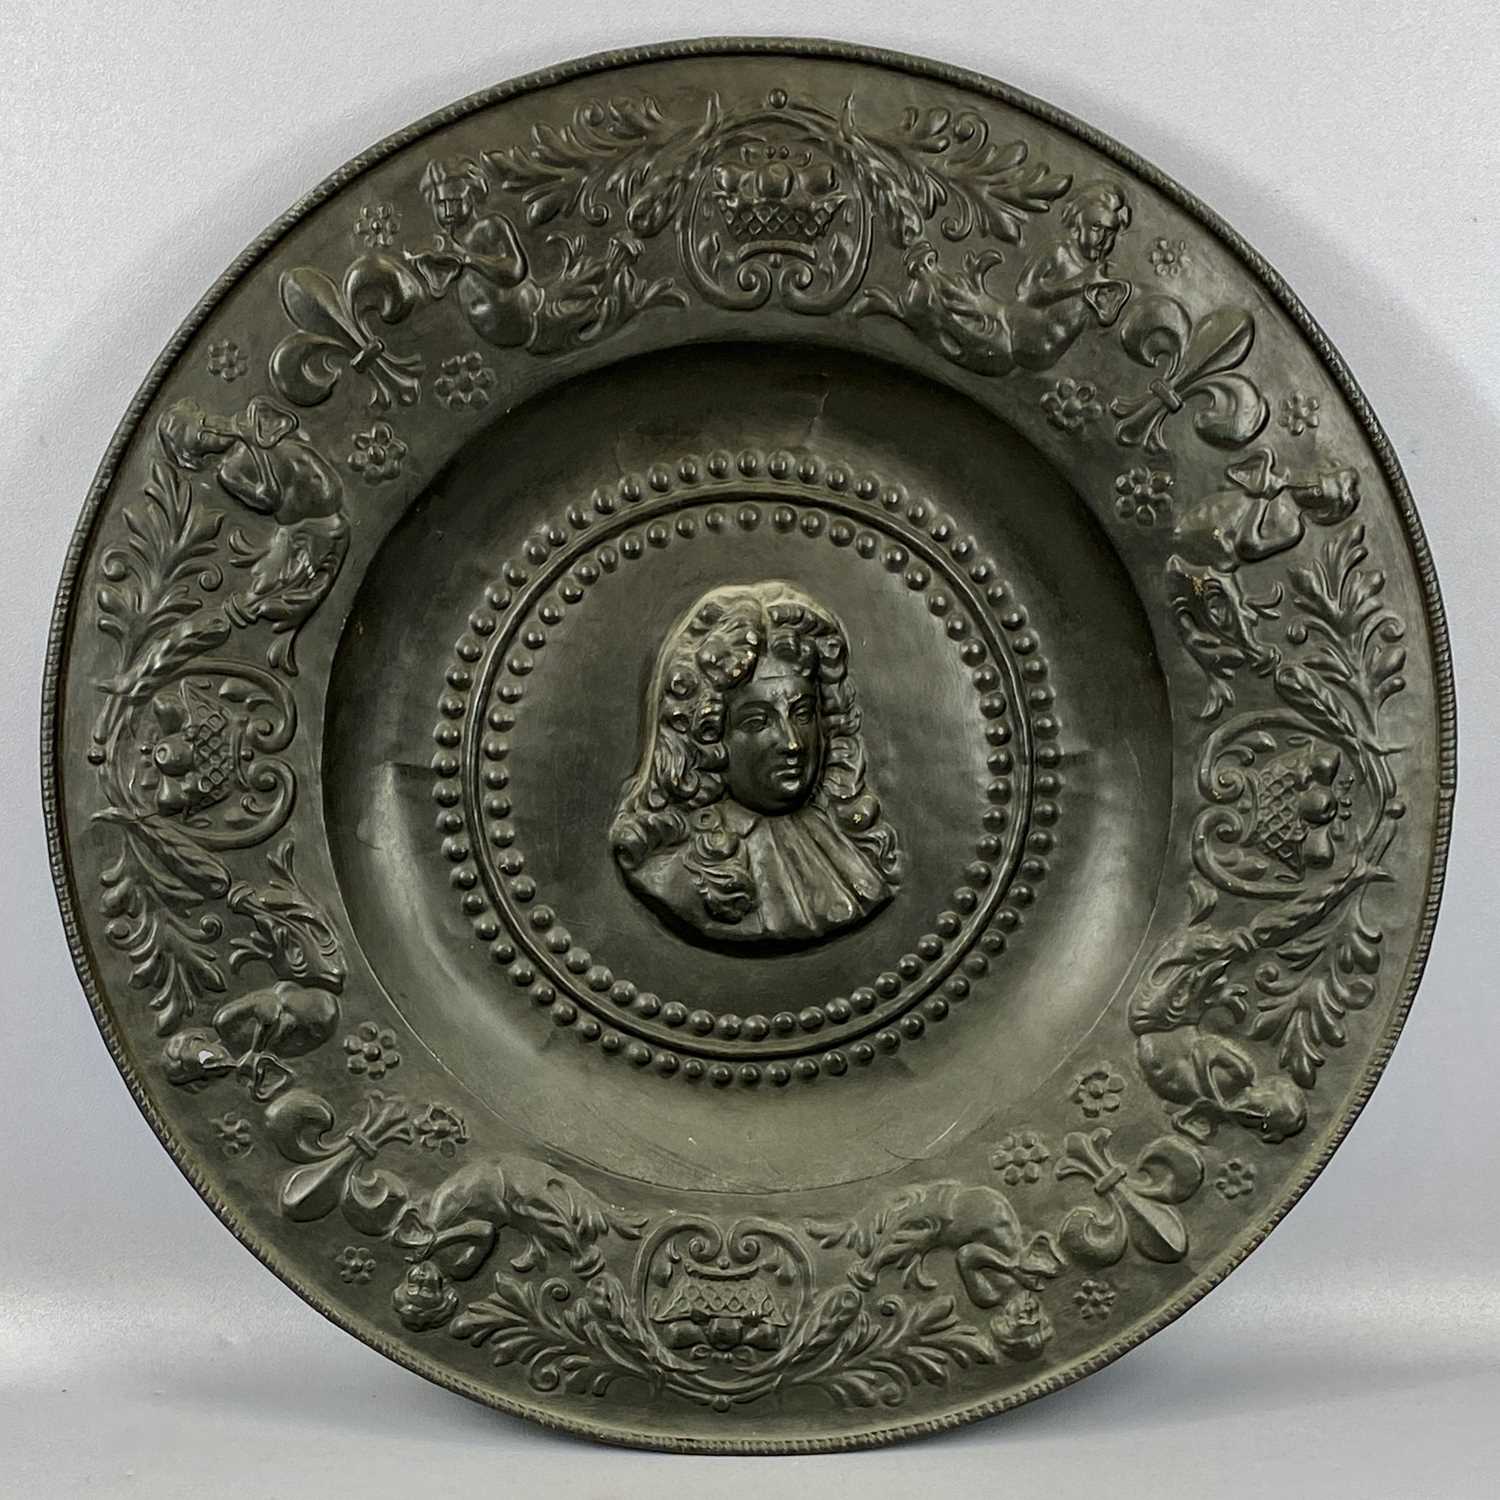 HEAVY CIRCULAR CAST METAL WALL PLAQUES A PAIR, French Renaissance style with portrait of a man to - Image 2 of 4